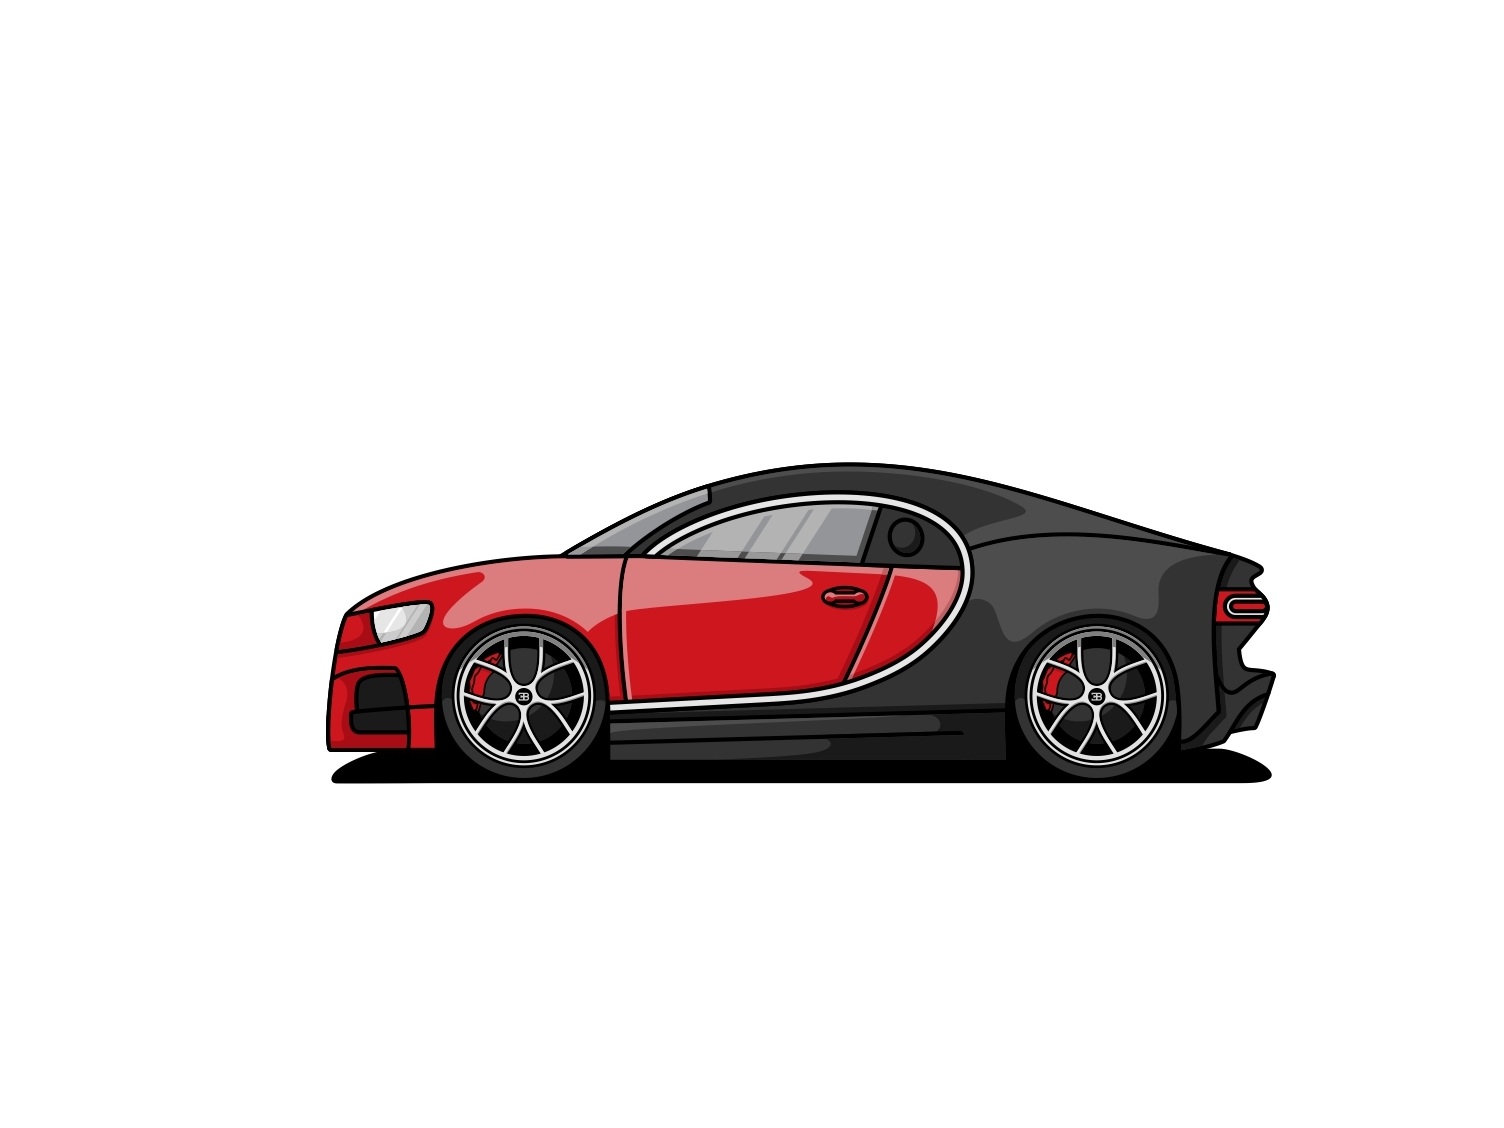 How to Draw Bugatti Veyron 16.4 Super Sport in 14 Easy Steps